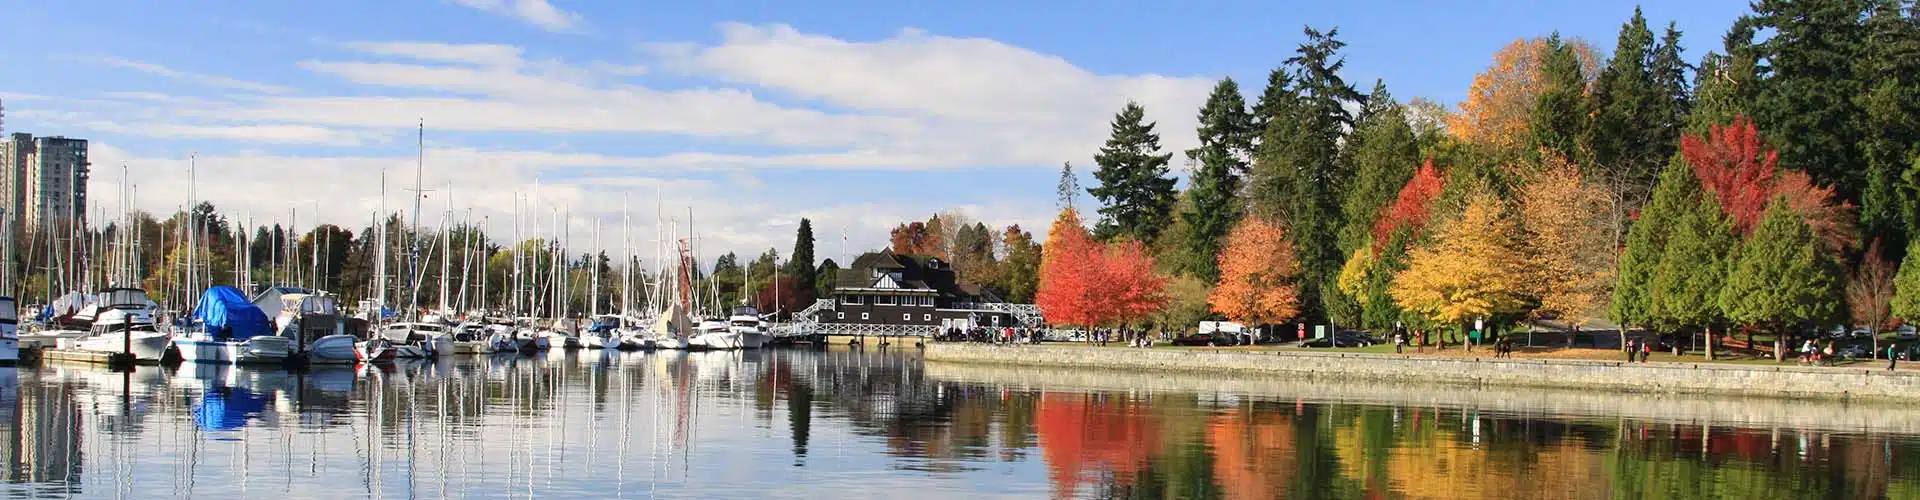 Stanley Park with colorful trees and boats in Vancouver in Canada